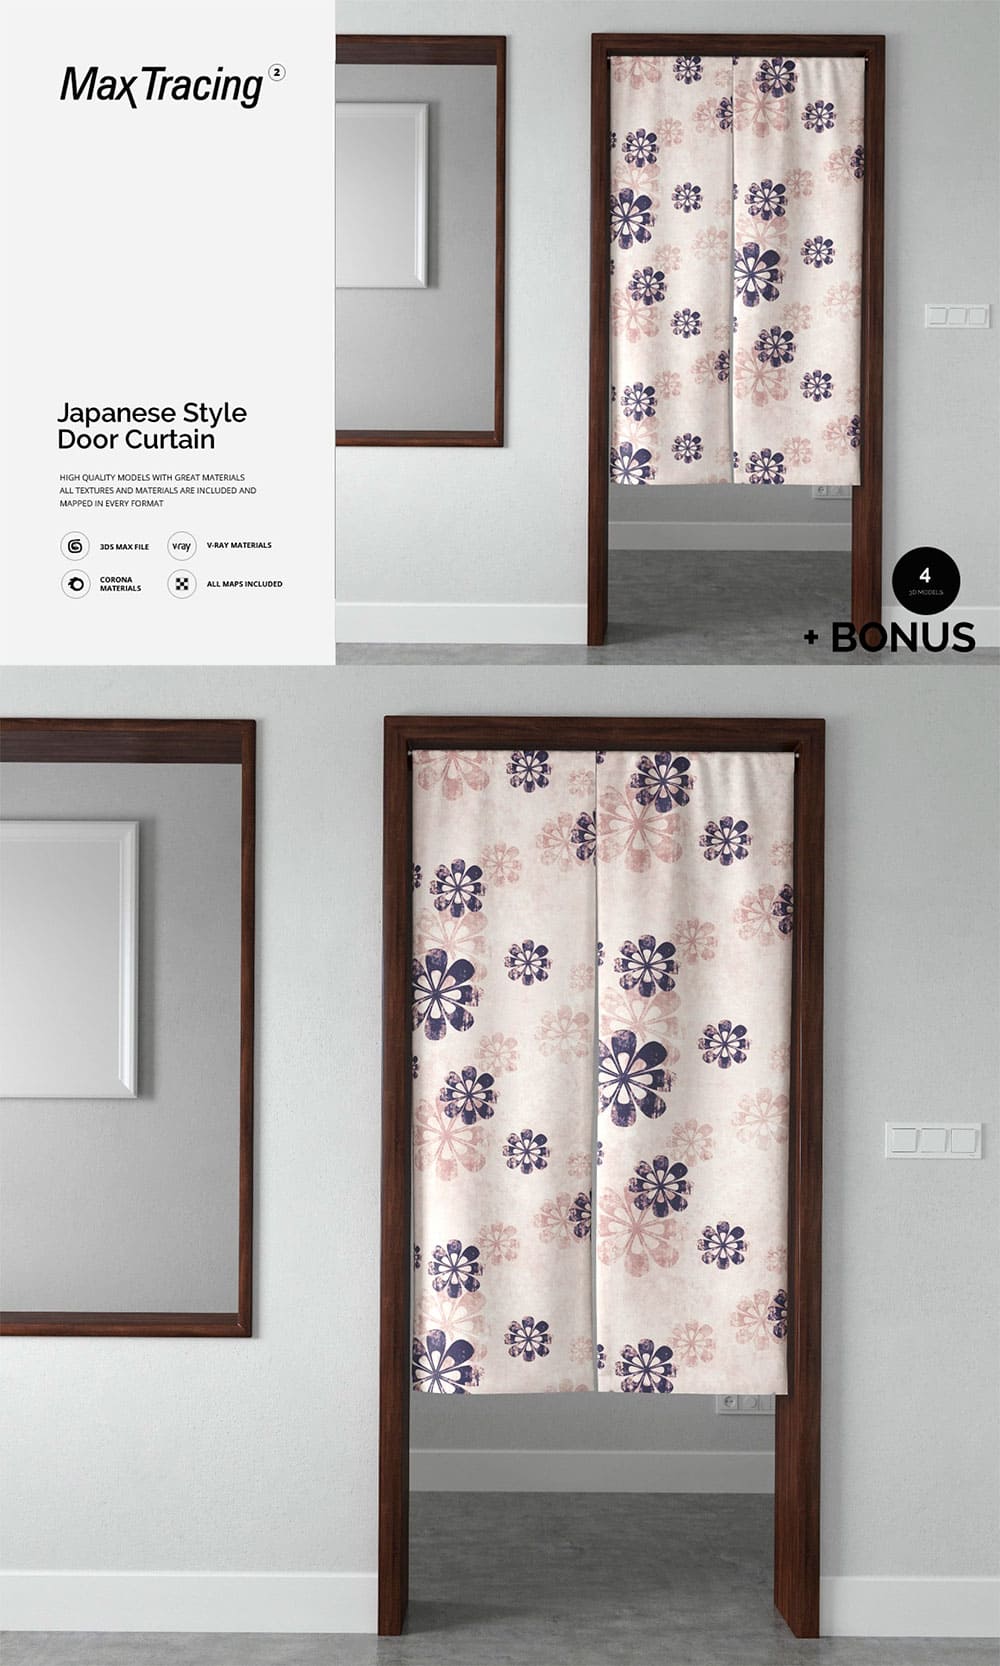 Japanese style door curtain, picture for pinterest.